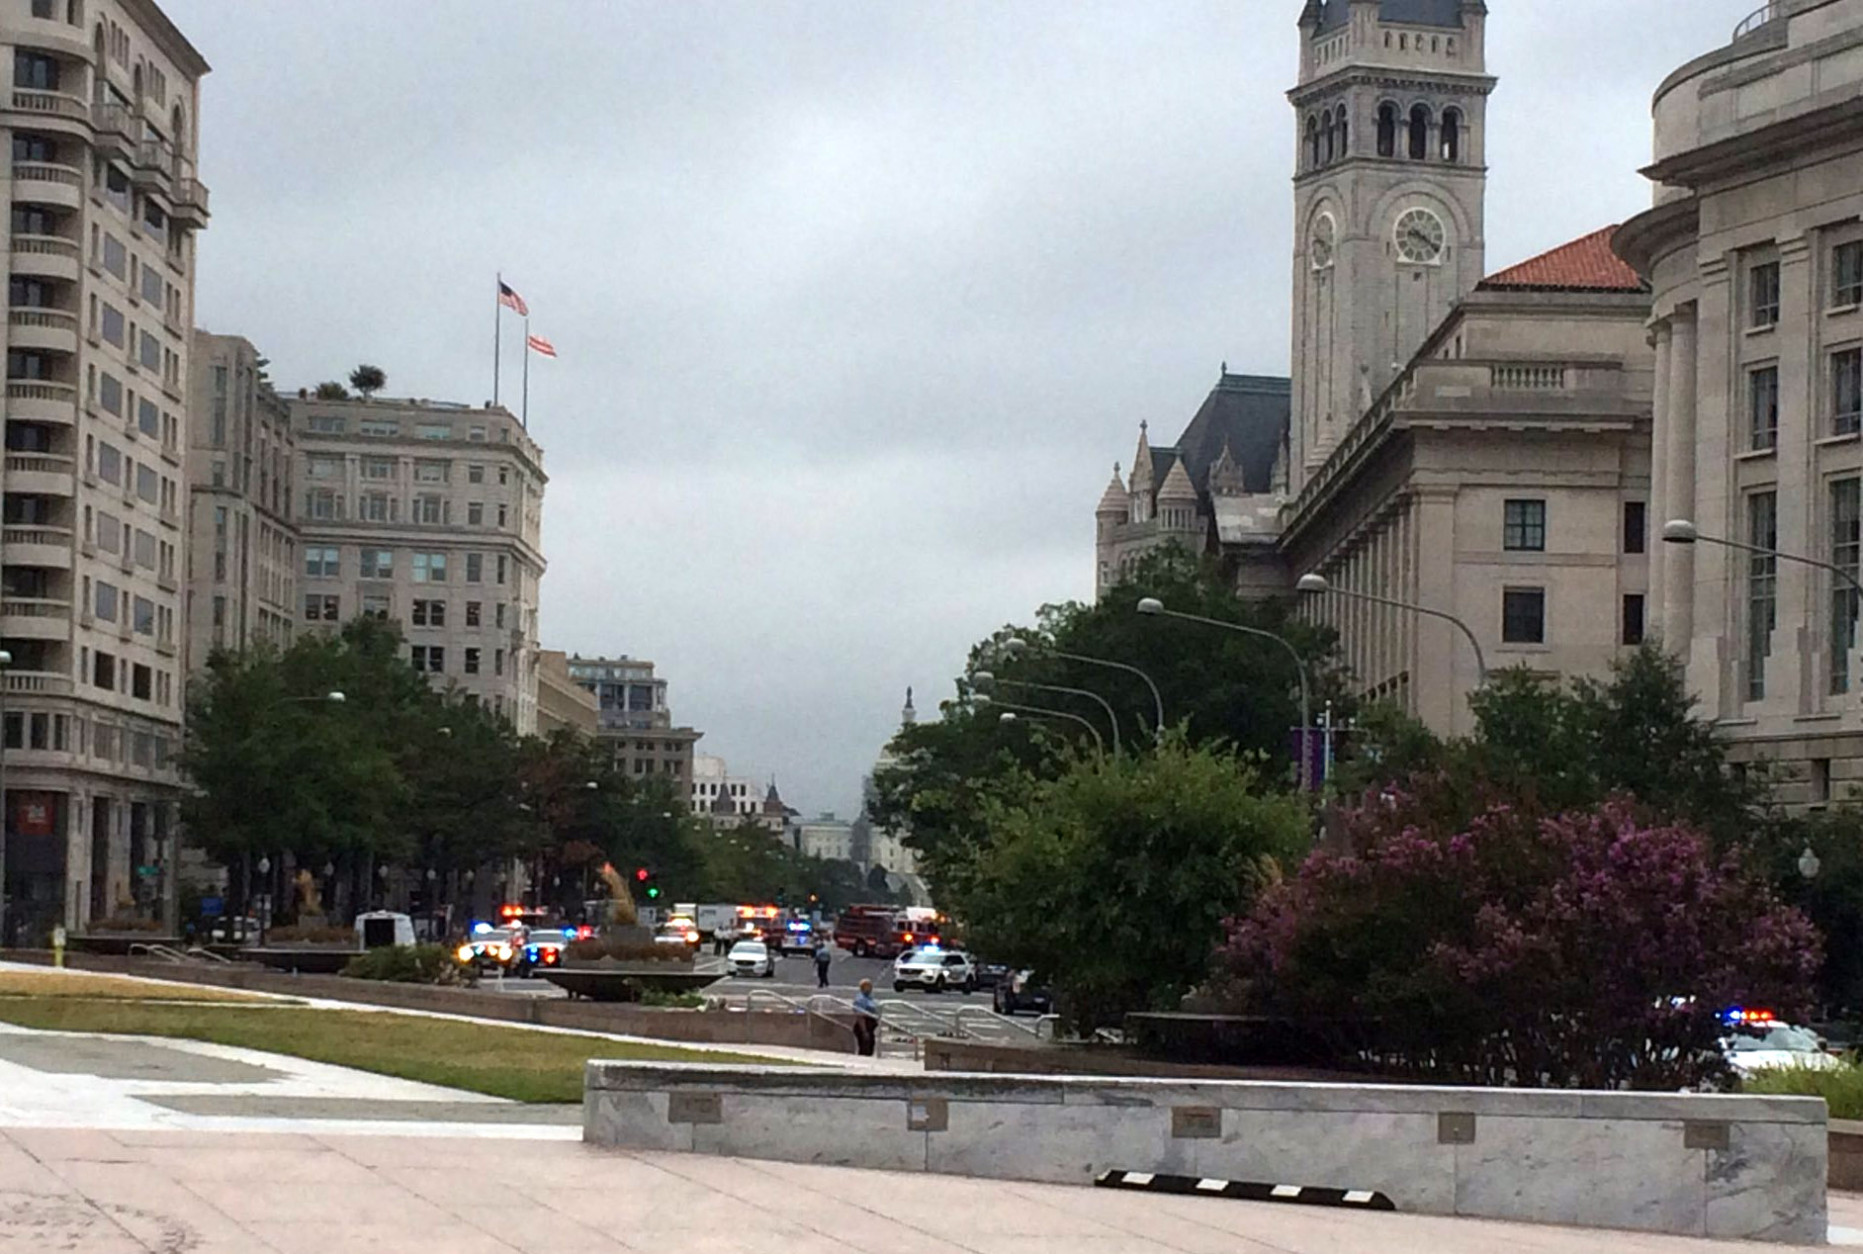 Numerous police cars fill Pennsylvania Avenue near the new Trump hotel as they investigated a suspicious package. The Warner Theatre and other nearby buildings were evacuated and entrances to the Metro Center Station were closed. Related road closures brought traffic to a near halt downtown as the morning commute was wrapping up on Tuesayd. Sept. 20, 2016. (WTOP/Nick Iannelli)